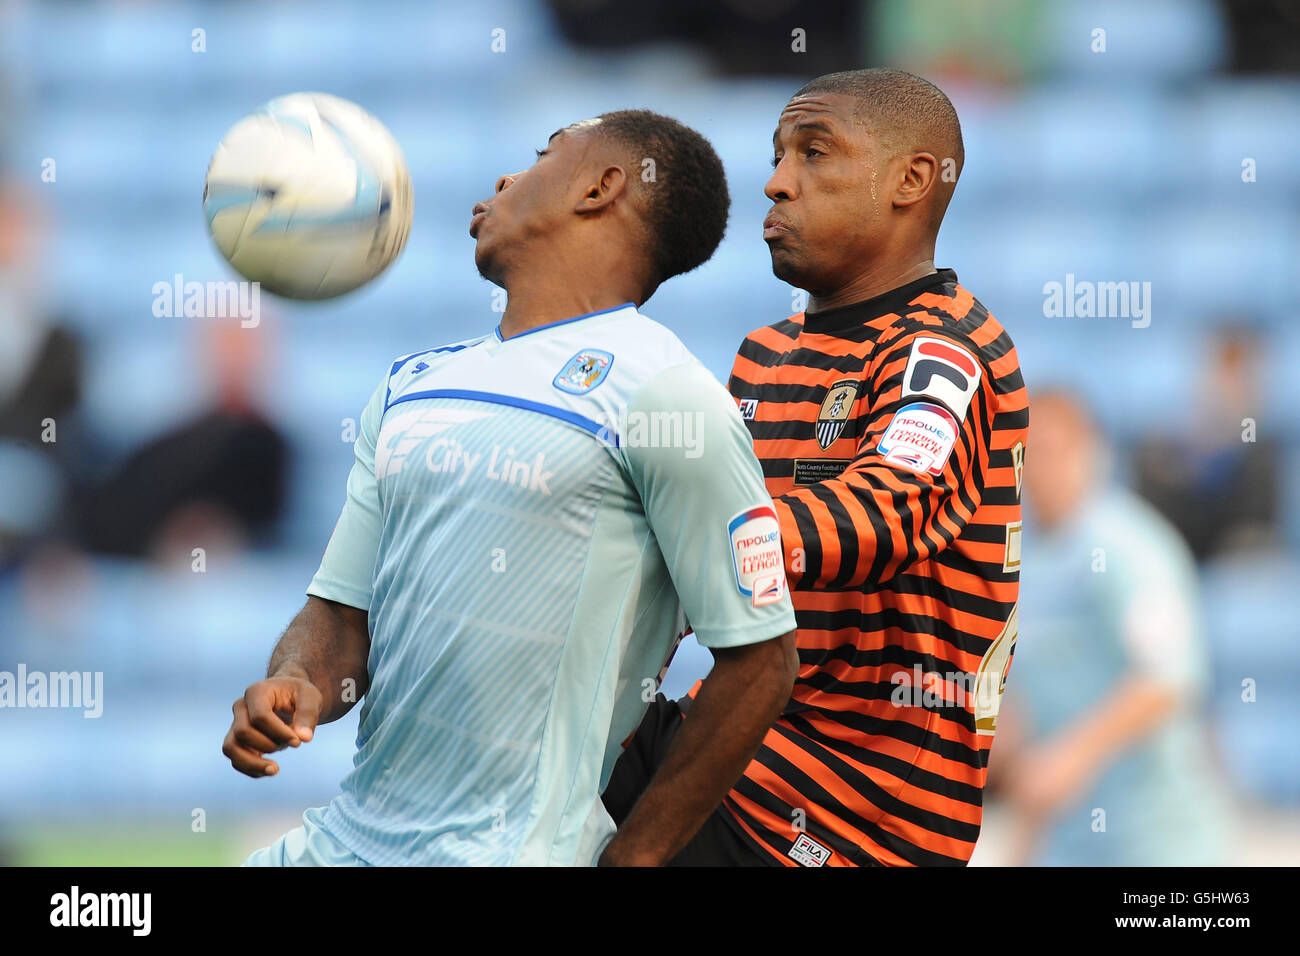 Coventry City's Franck Moussa and Notts County's Andre Boucaud battle for the ball during the npower Football League One match at the Ricoh Arena, Coventry. Stock Photo